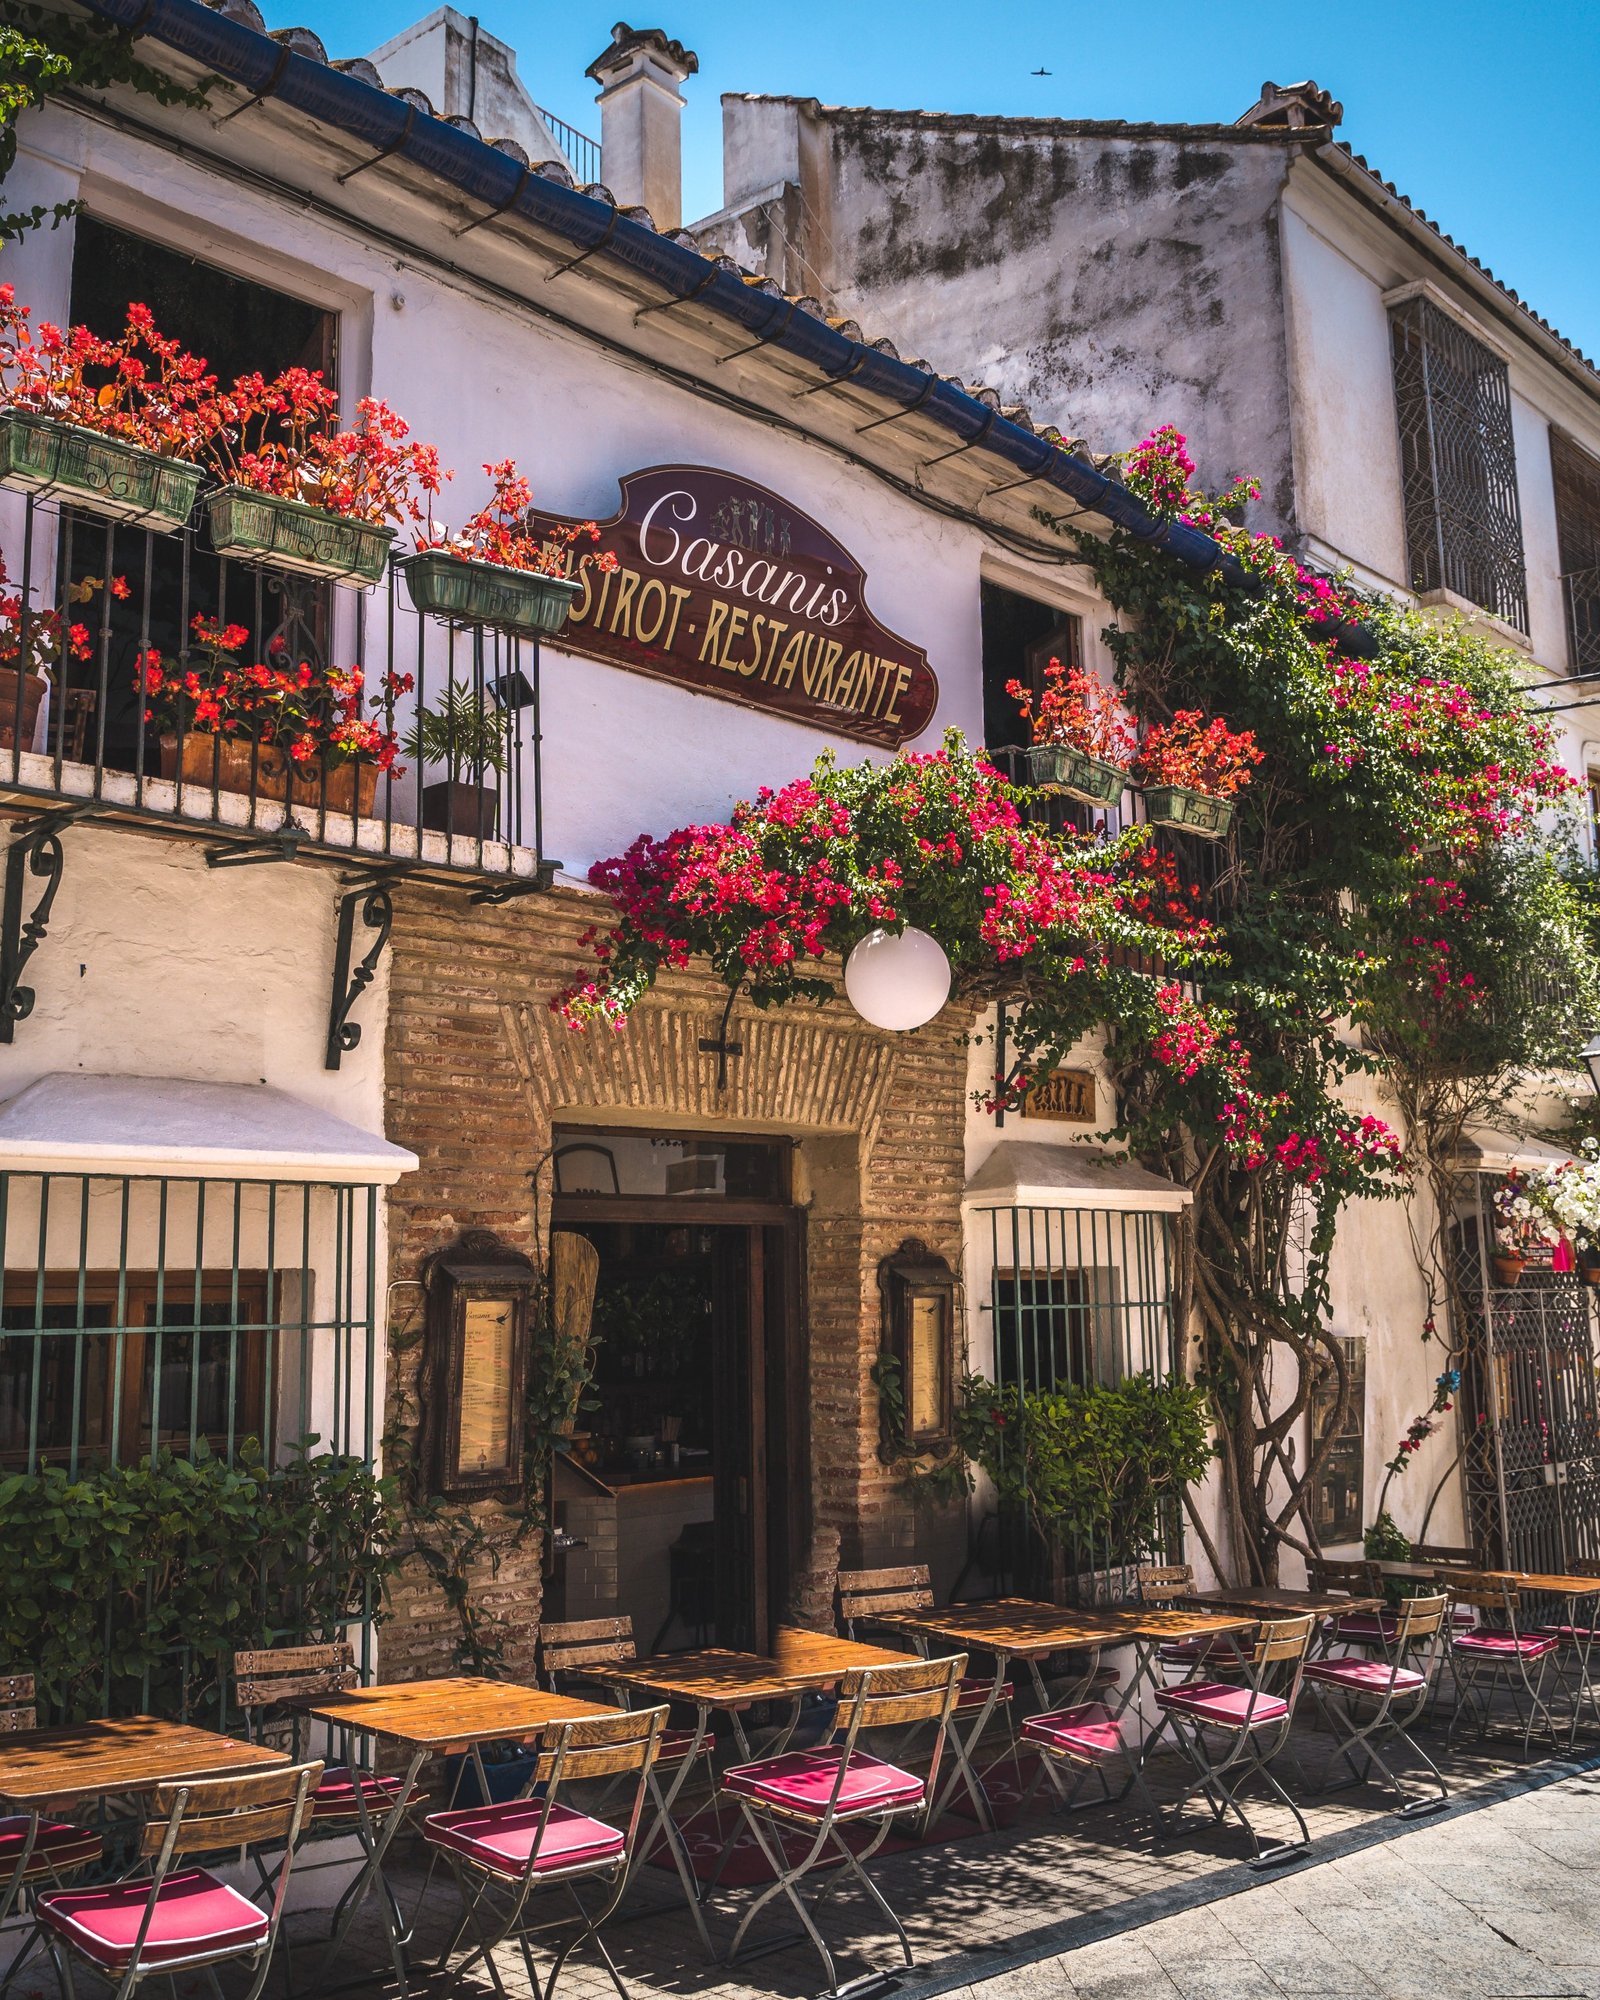 Top 12 Restaurants to Check Out in Marbella Old Town - old town 33 post scaled 1 - Tourism -